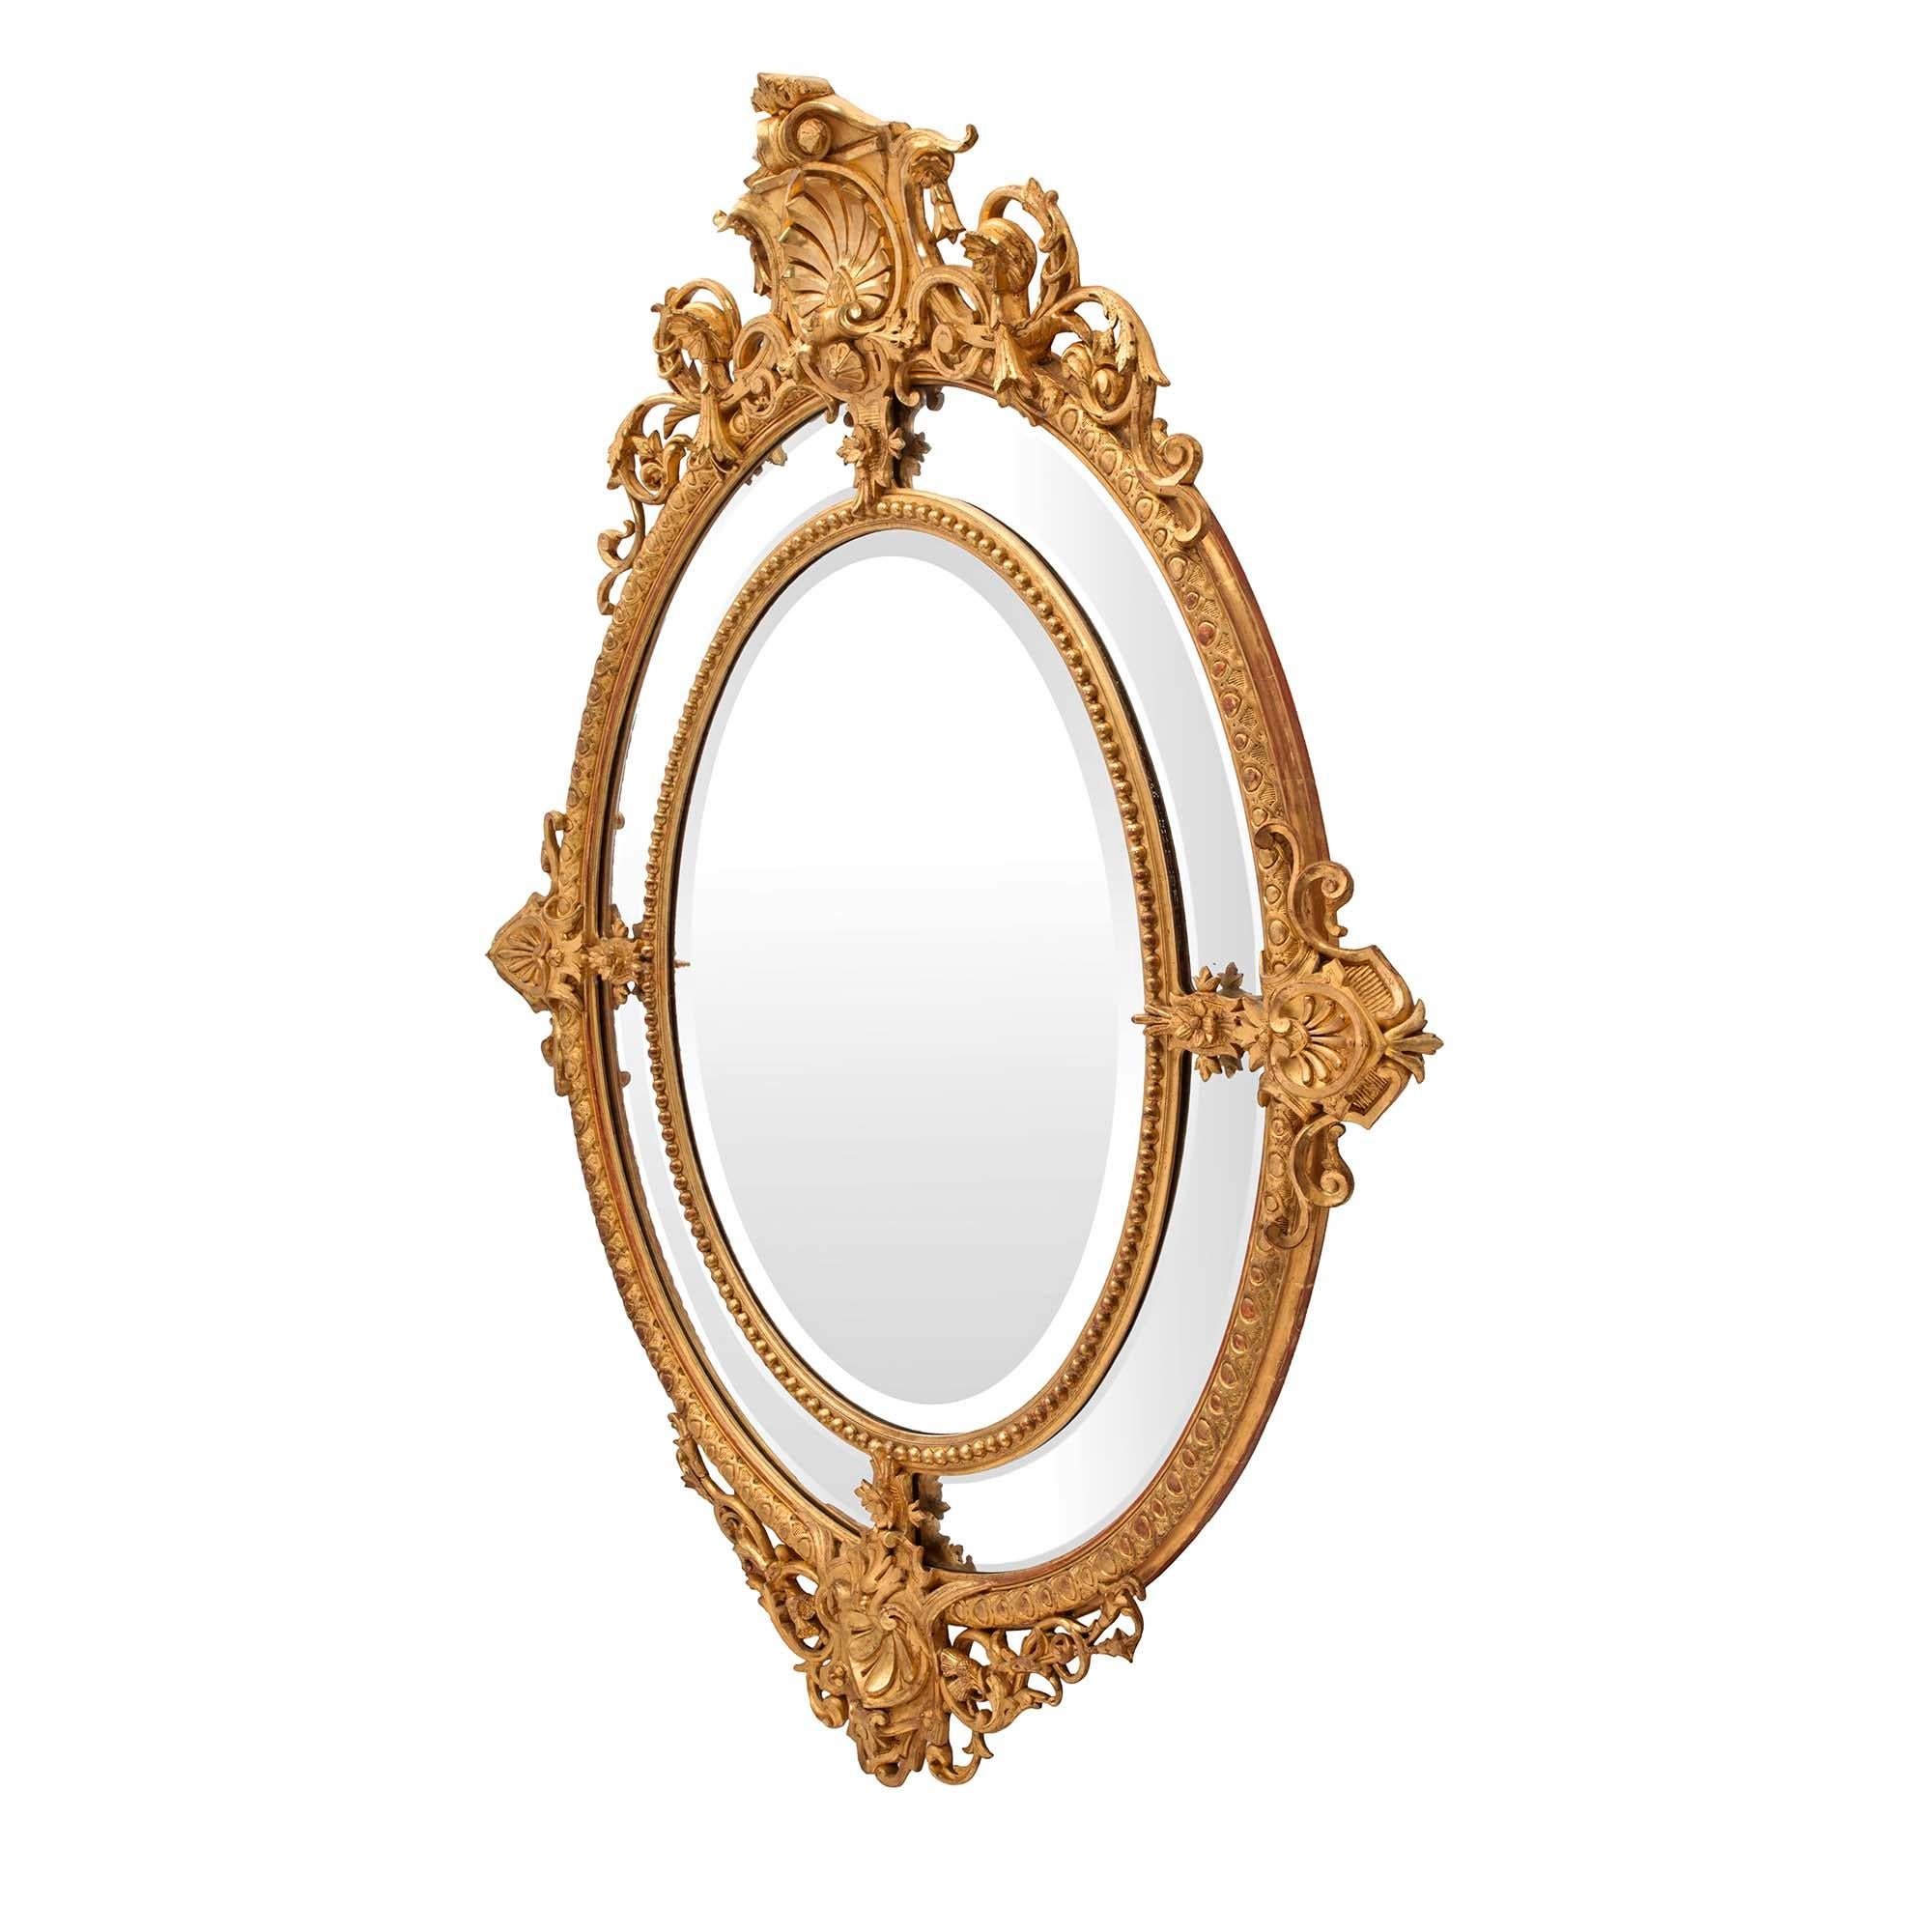 A beautiful French 19th century Louis XVI st. oval double framed giltwood mirror. The original beveled mirror plate is framed within a fine beaded border. The four arched shaped original beveled mirror plates are separated by a charming and richly